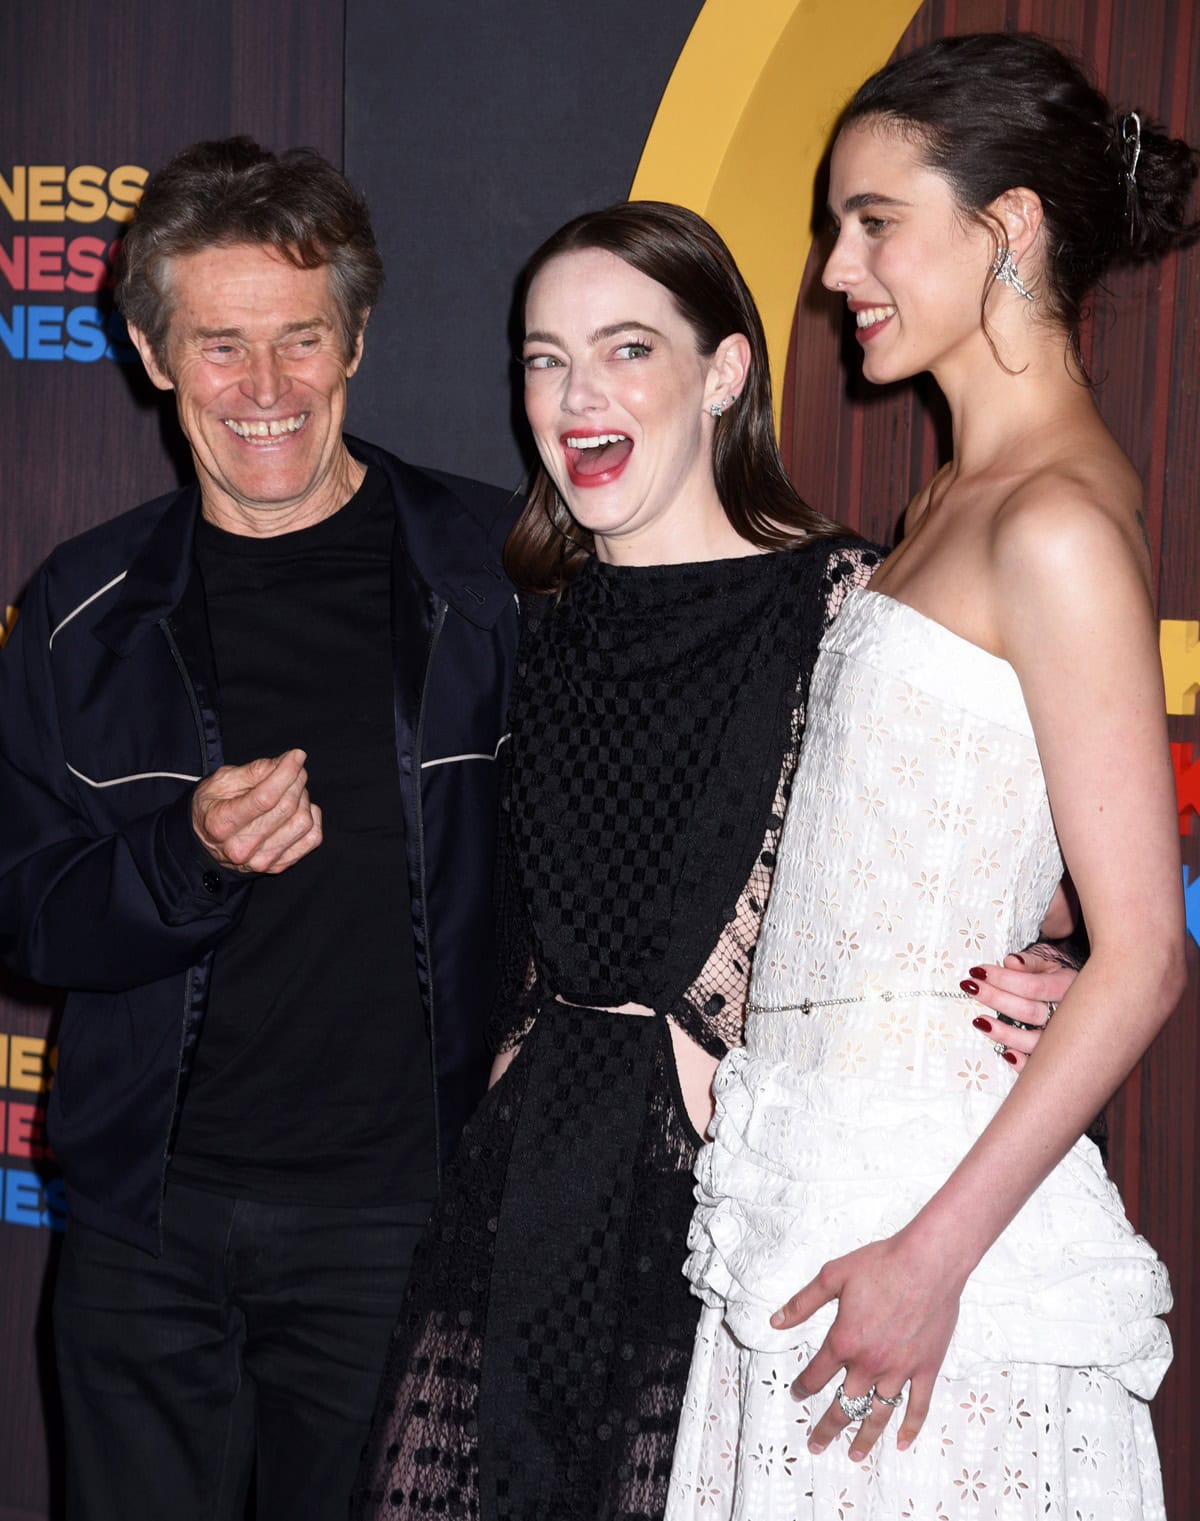 Emma Stone radiates joy with a wide smile and sparkling eyes, while Willem Dafoe beams with a hearty laugh, and Margaret Qualley smiles warmly, capturing a moment of genuine camaraderie and happiness among the trio